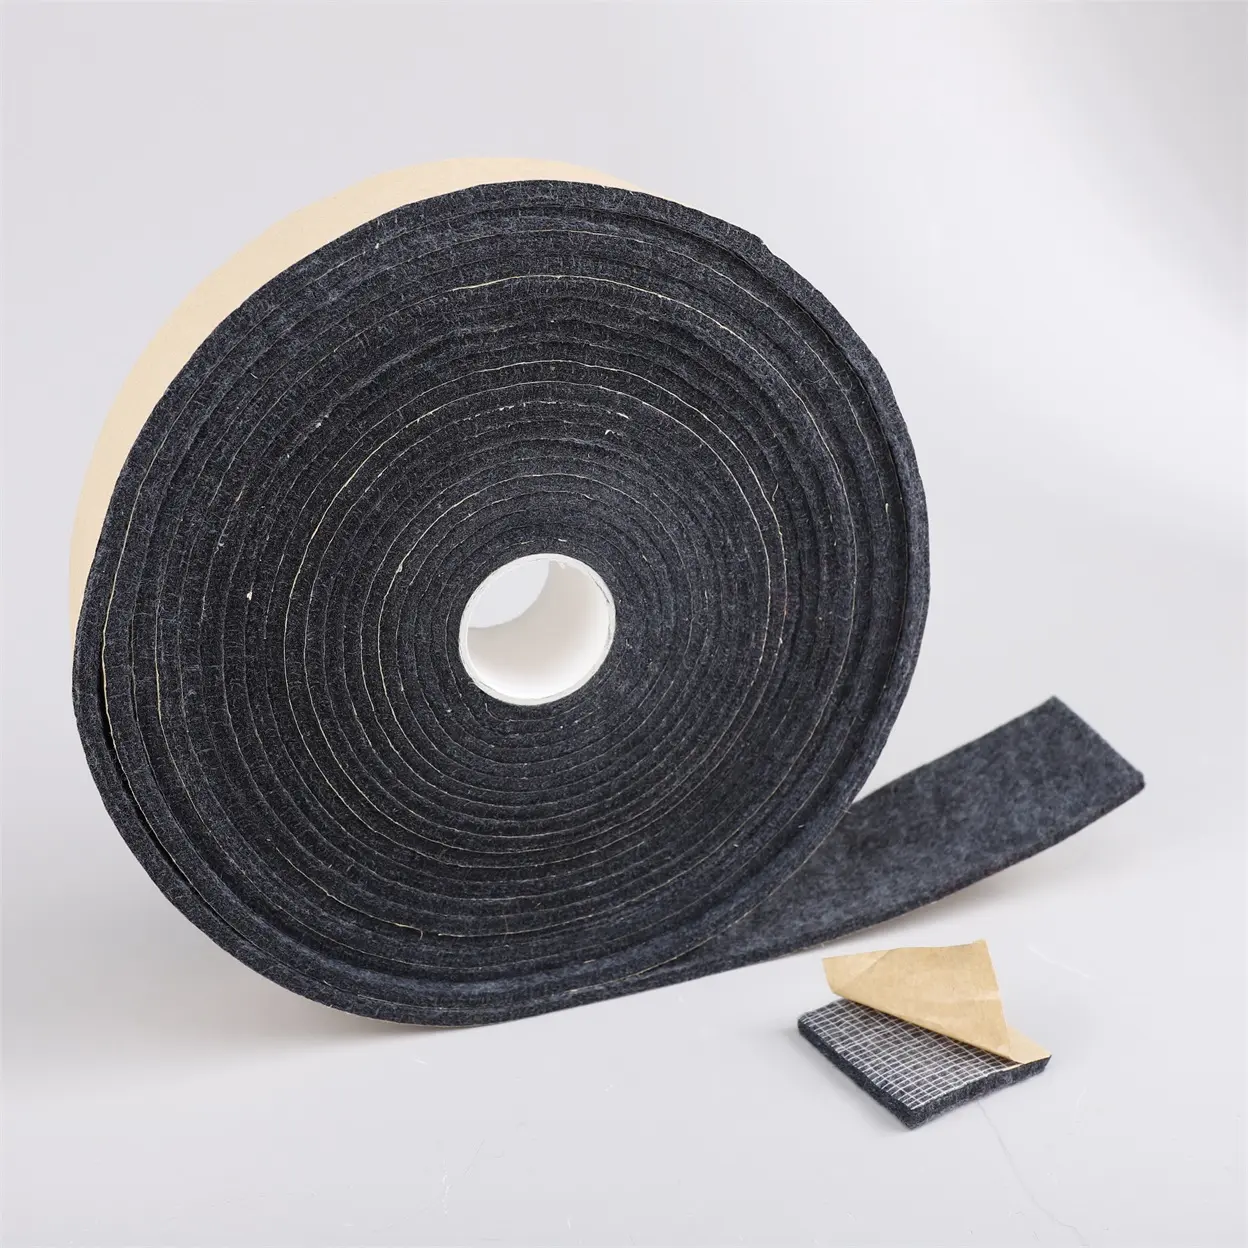 100% Polyester Non-Woven Self Adhesive Backing Material Anti-Slip Felt Pad for Floor Carpets Furniture Accessories Indoor Use